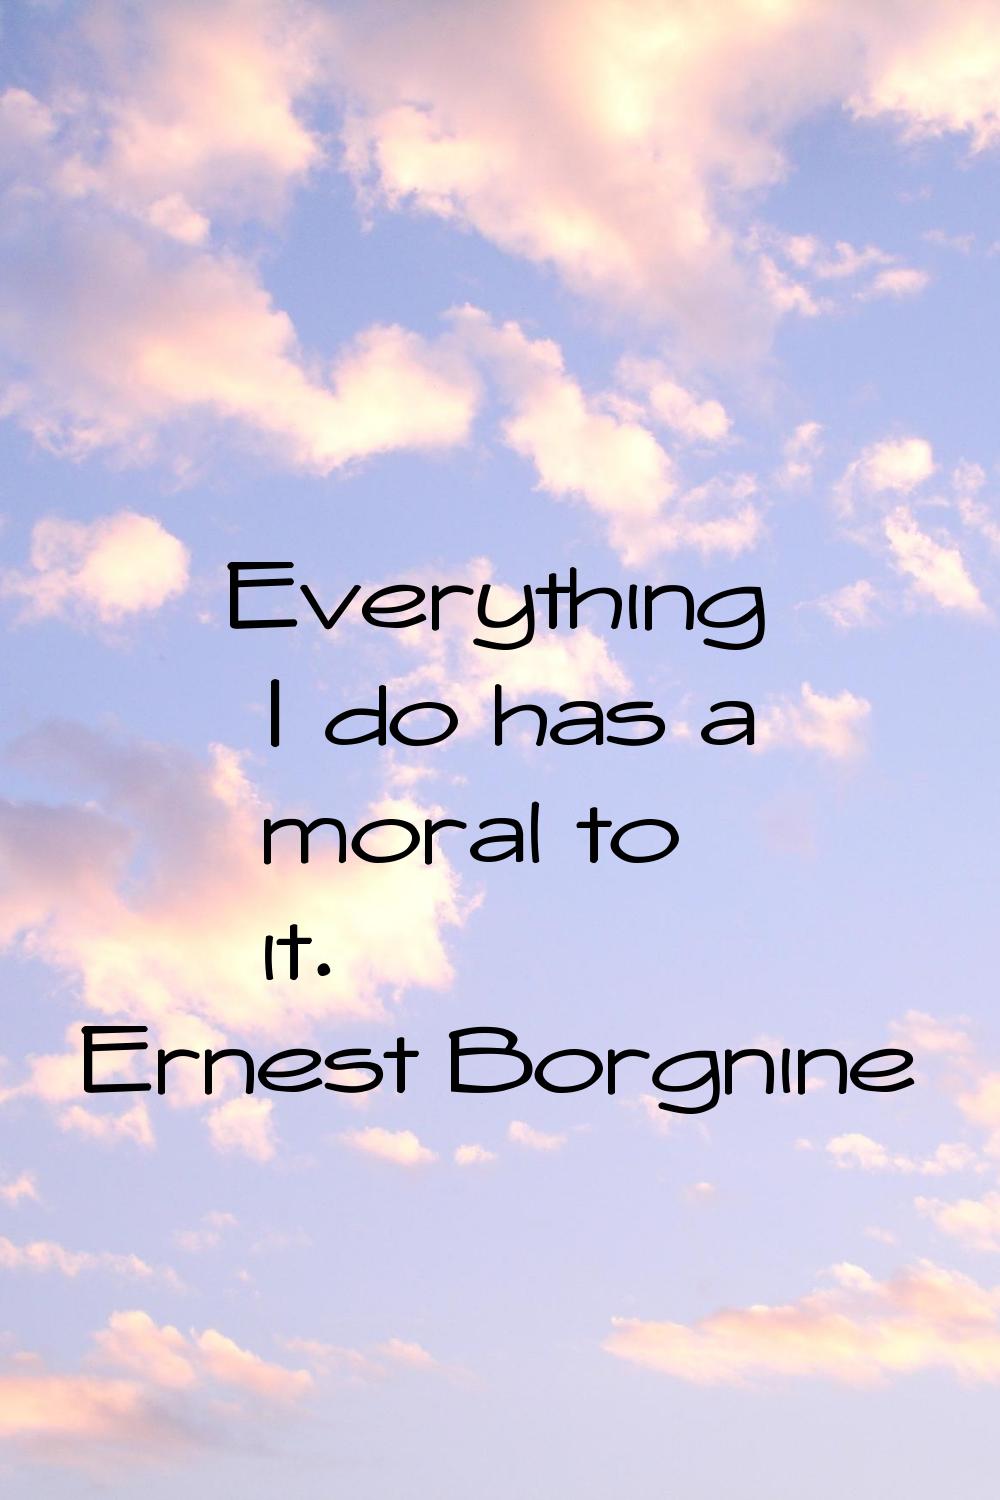 Everything I do has a moral to it.